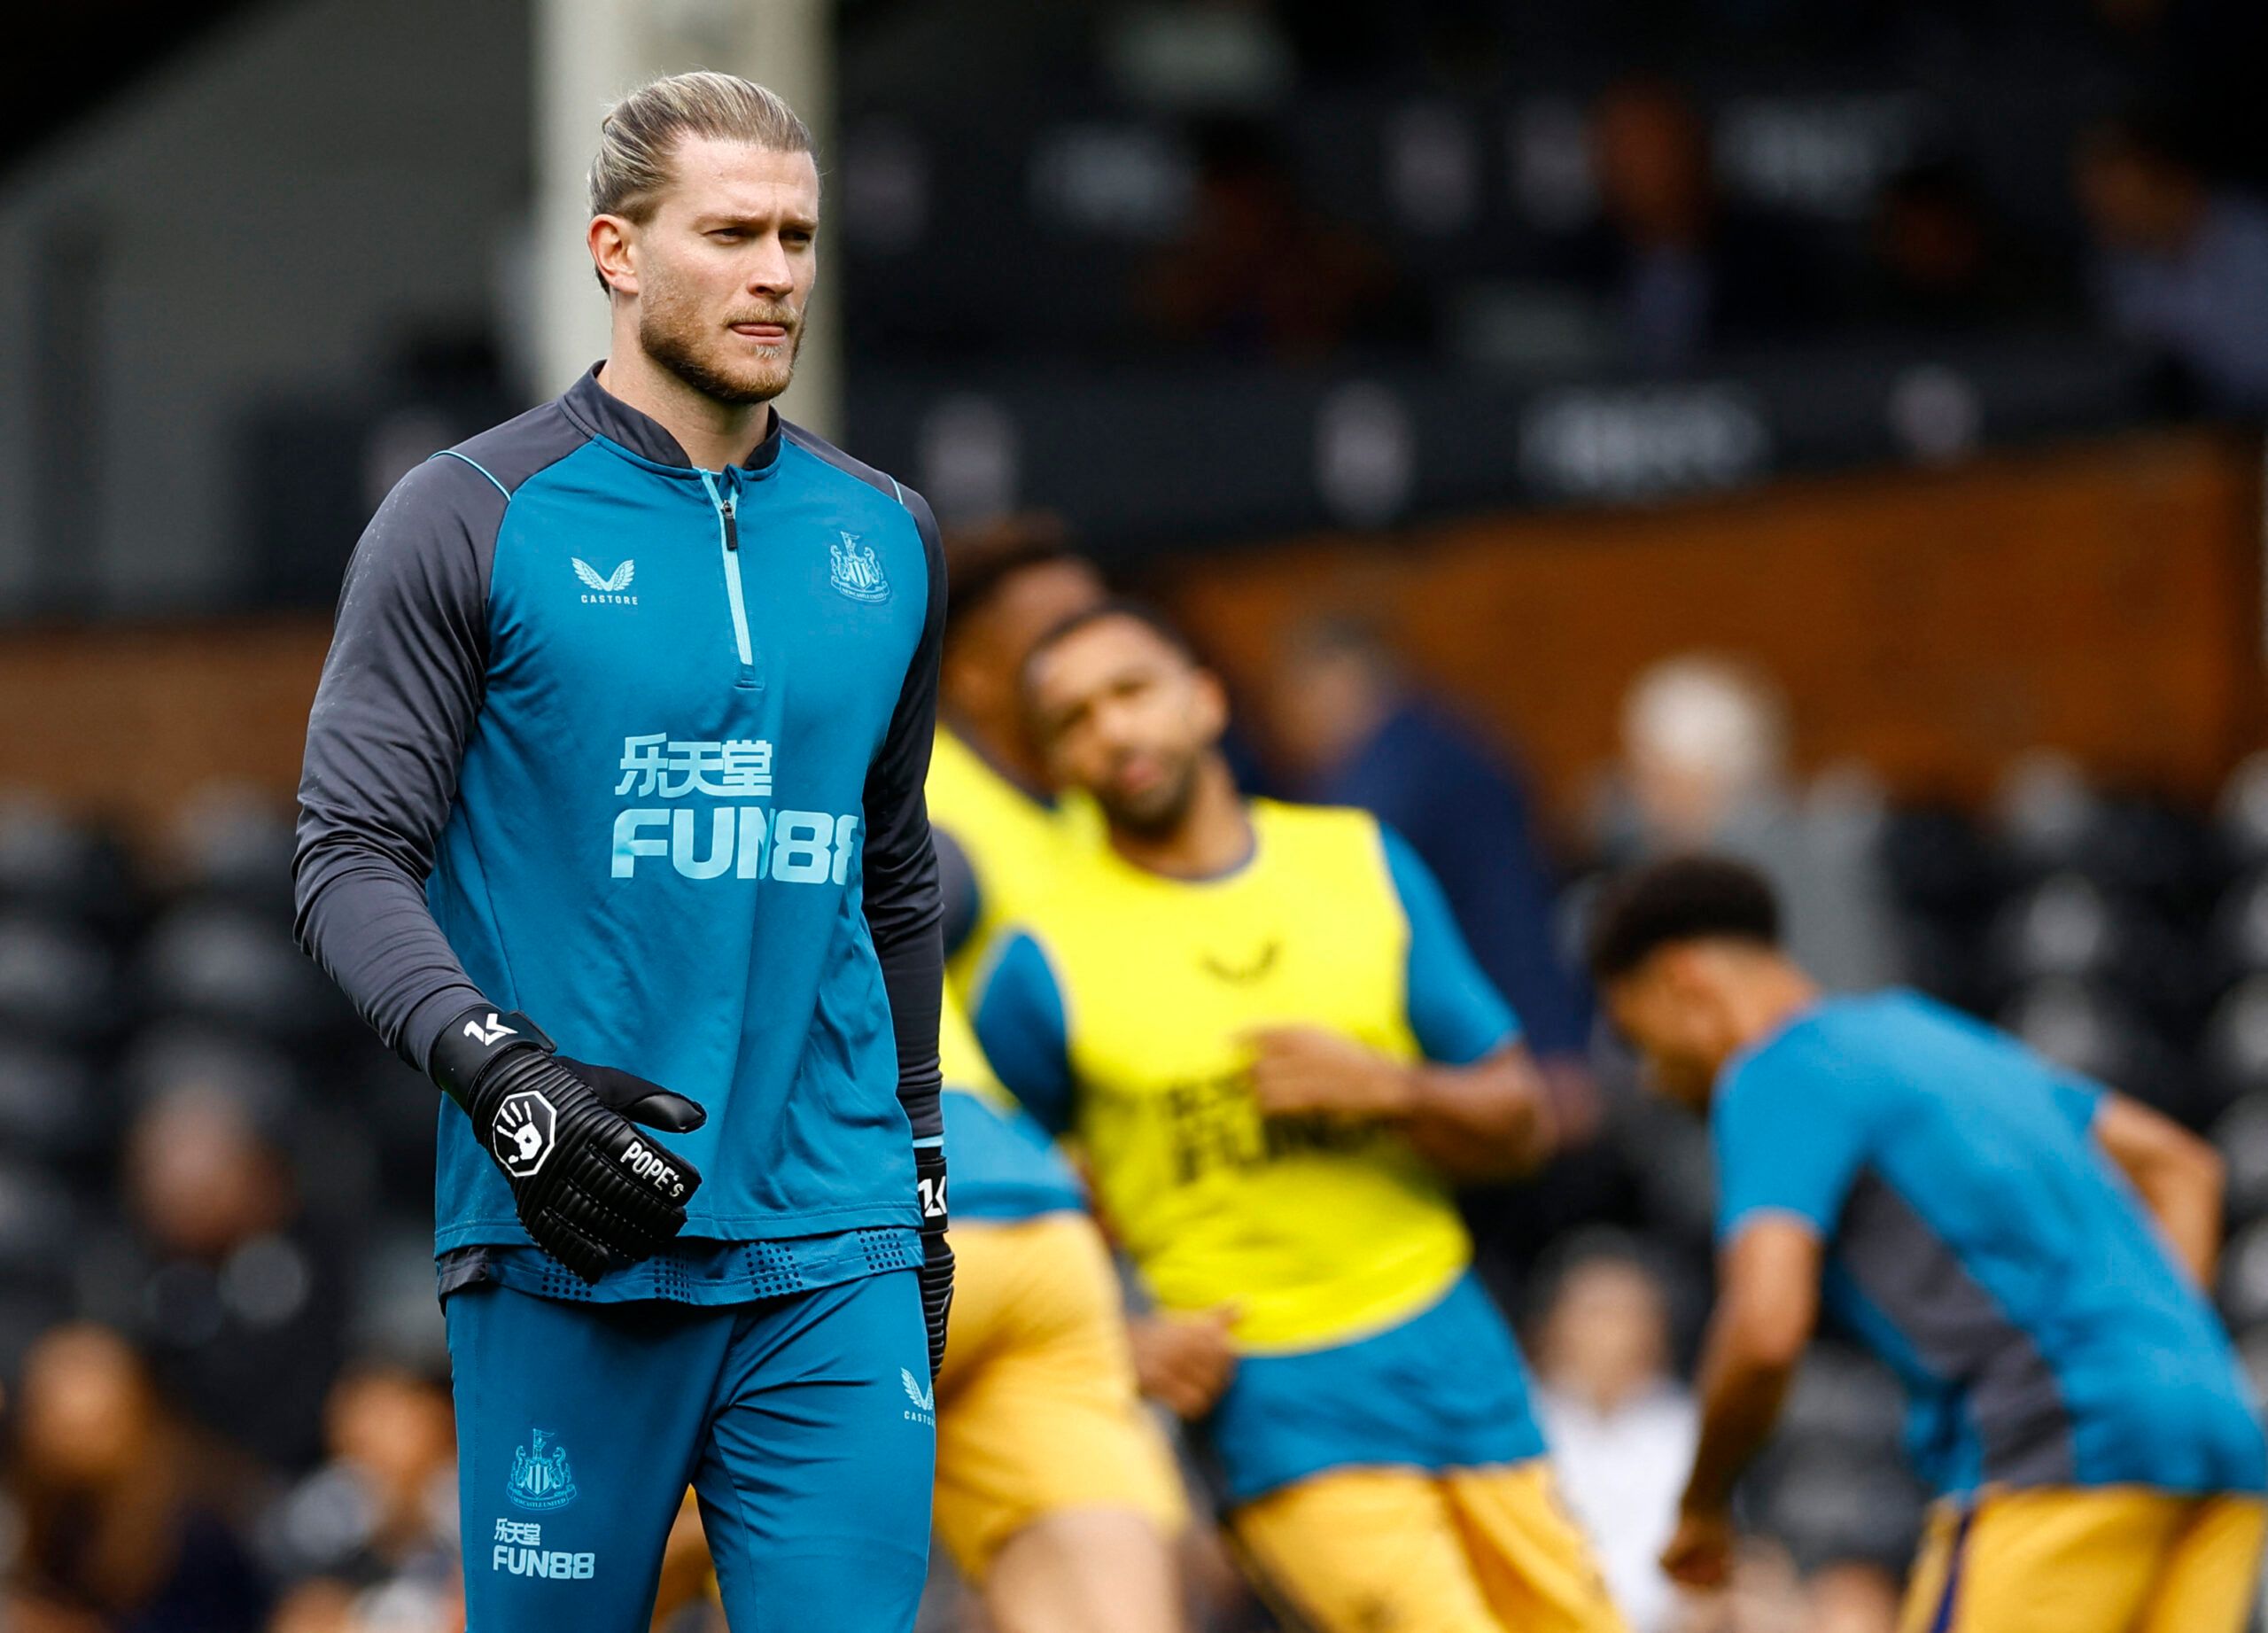 Soccer Football - Premier League - Fulham v Newcastle United - Craven Cottage, London, Britain - October 1, 2022 Newcastle United's Loris Karius during the warm up before the match Action Images via Reuters/Andrew Boyers EDITORIAL USE ONLY. No use with unauthorized audio, video, data, fixture lists, club/league logos or 'live' services. Online in-match use limited to 75 images, no video emulation. No use in betting, games or single club /league/player publications.  Please contact your account r